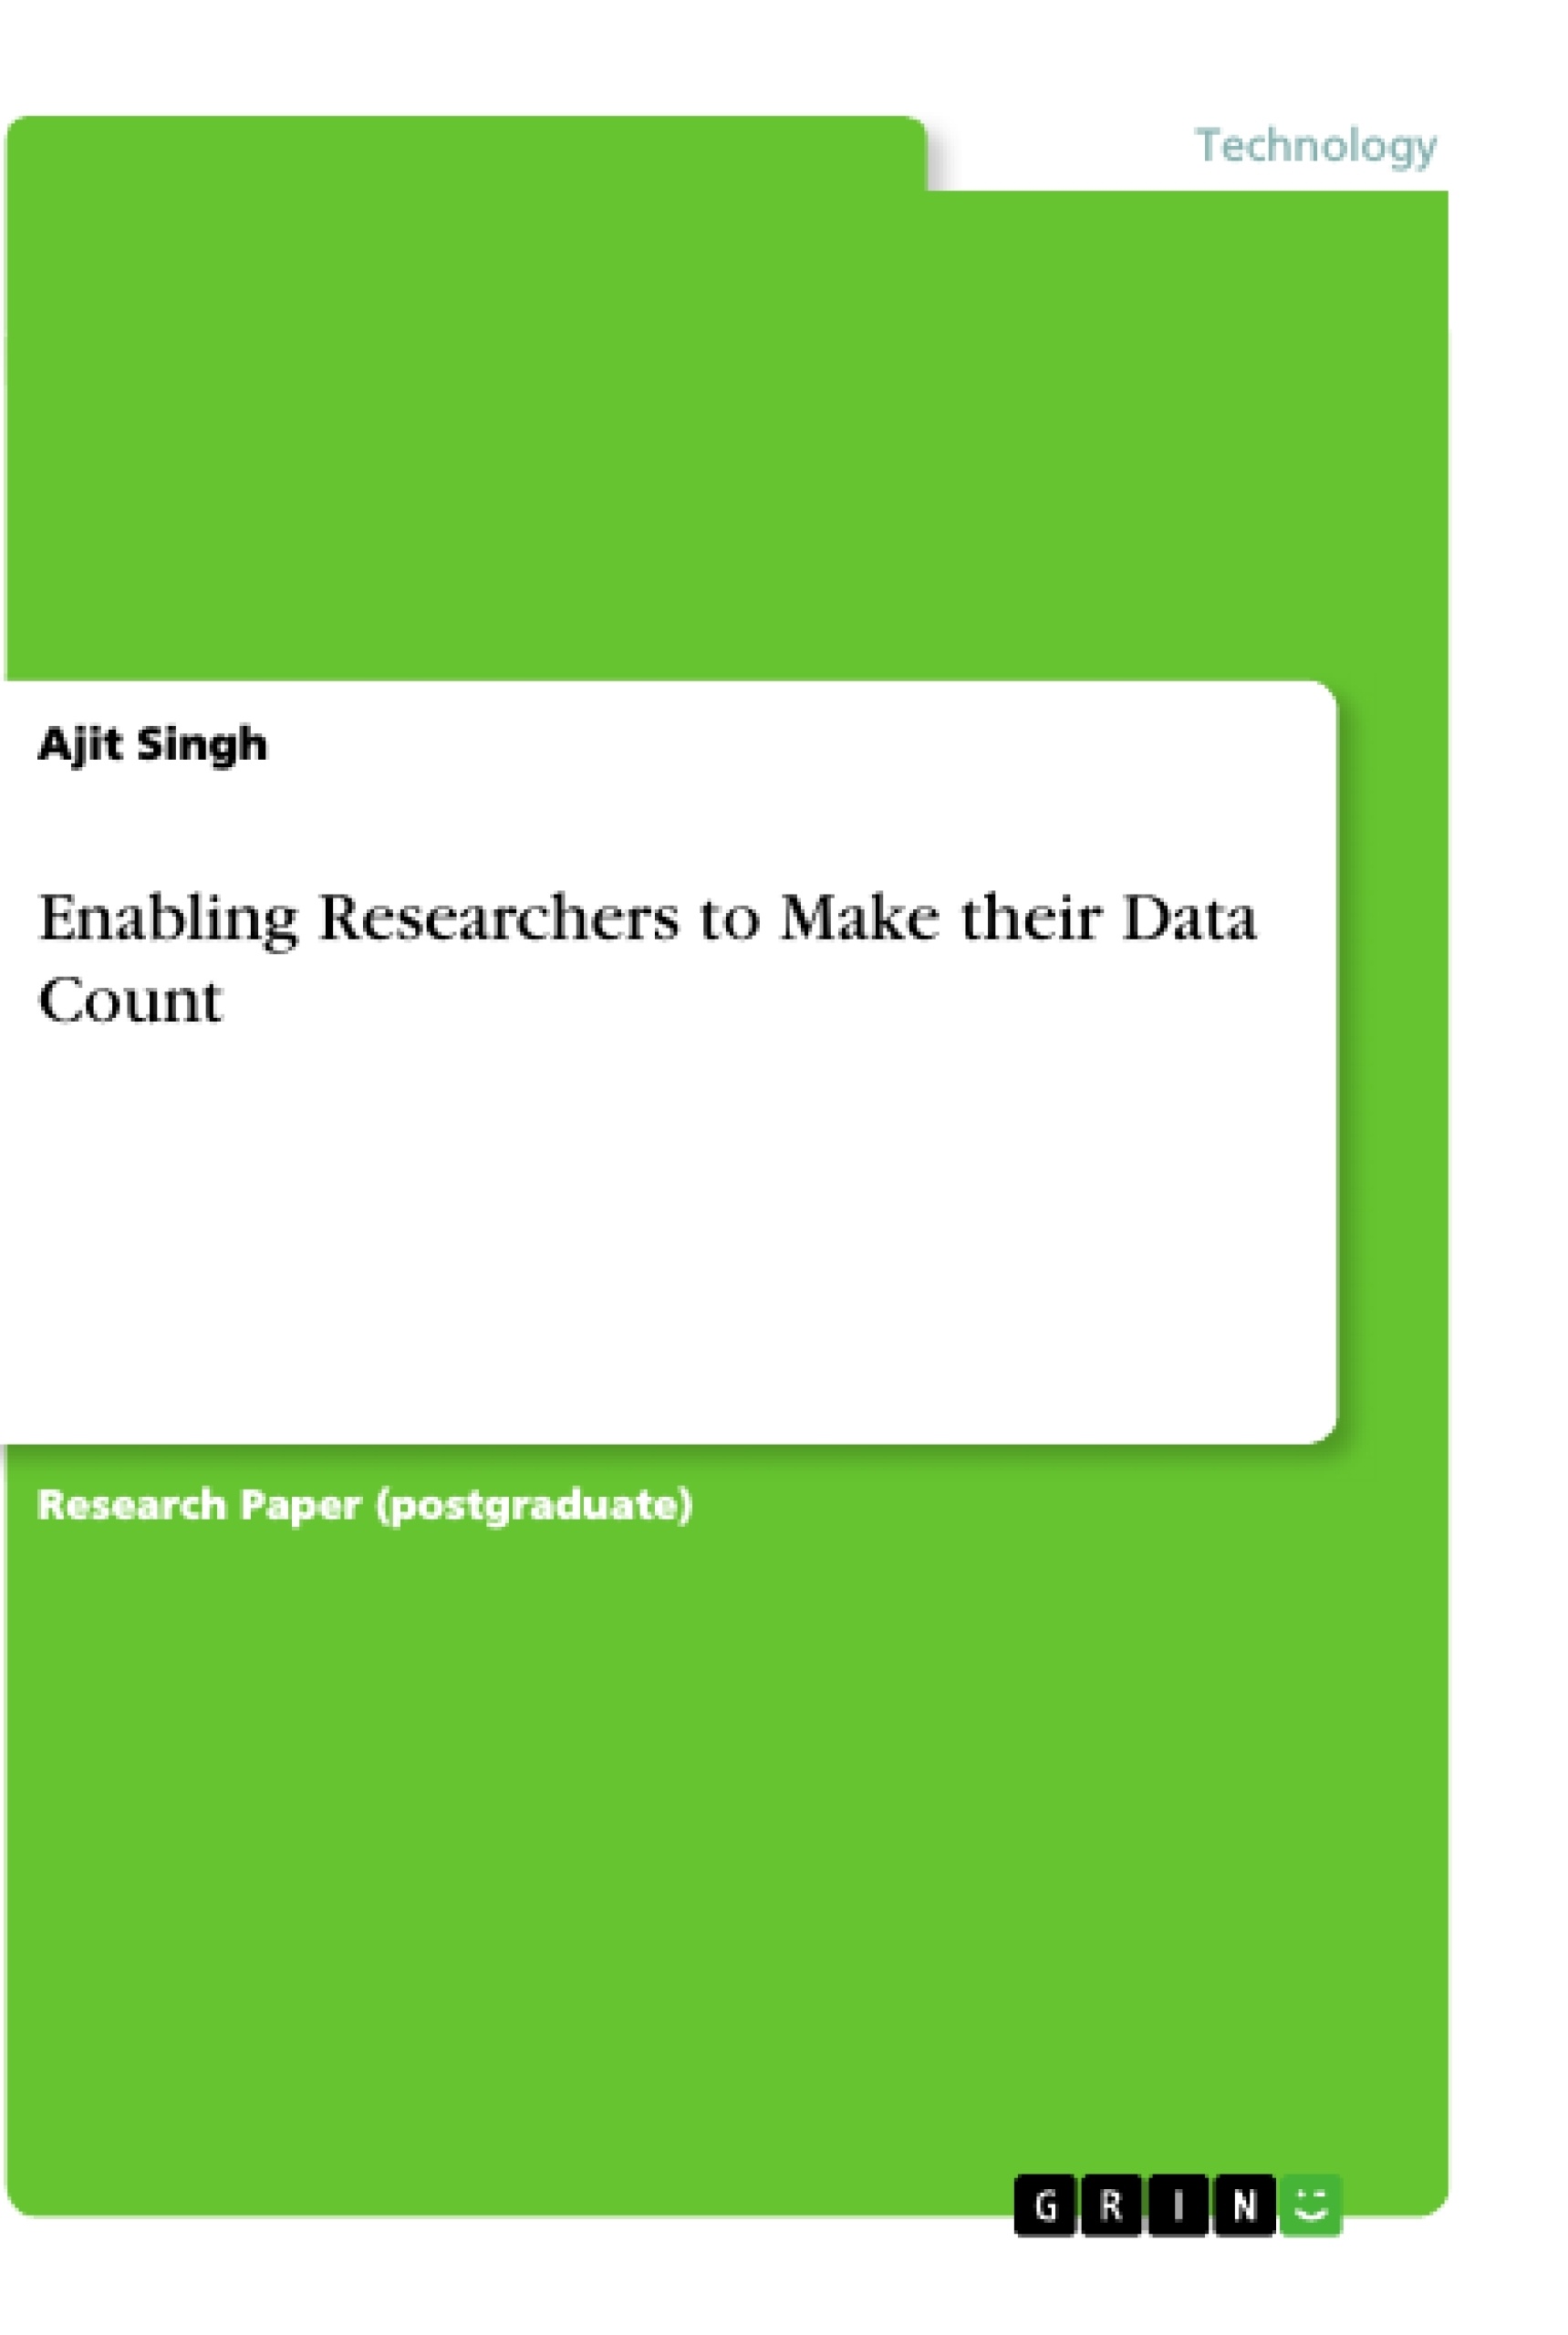 Titel: Enabling Researchers to Make their Data Count